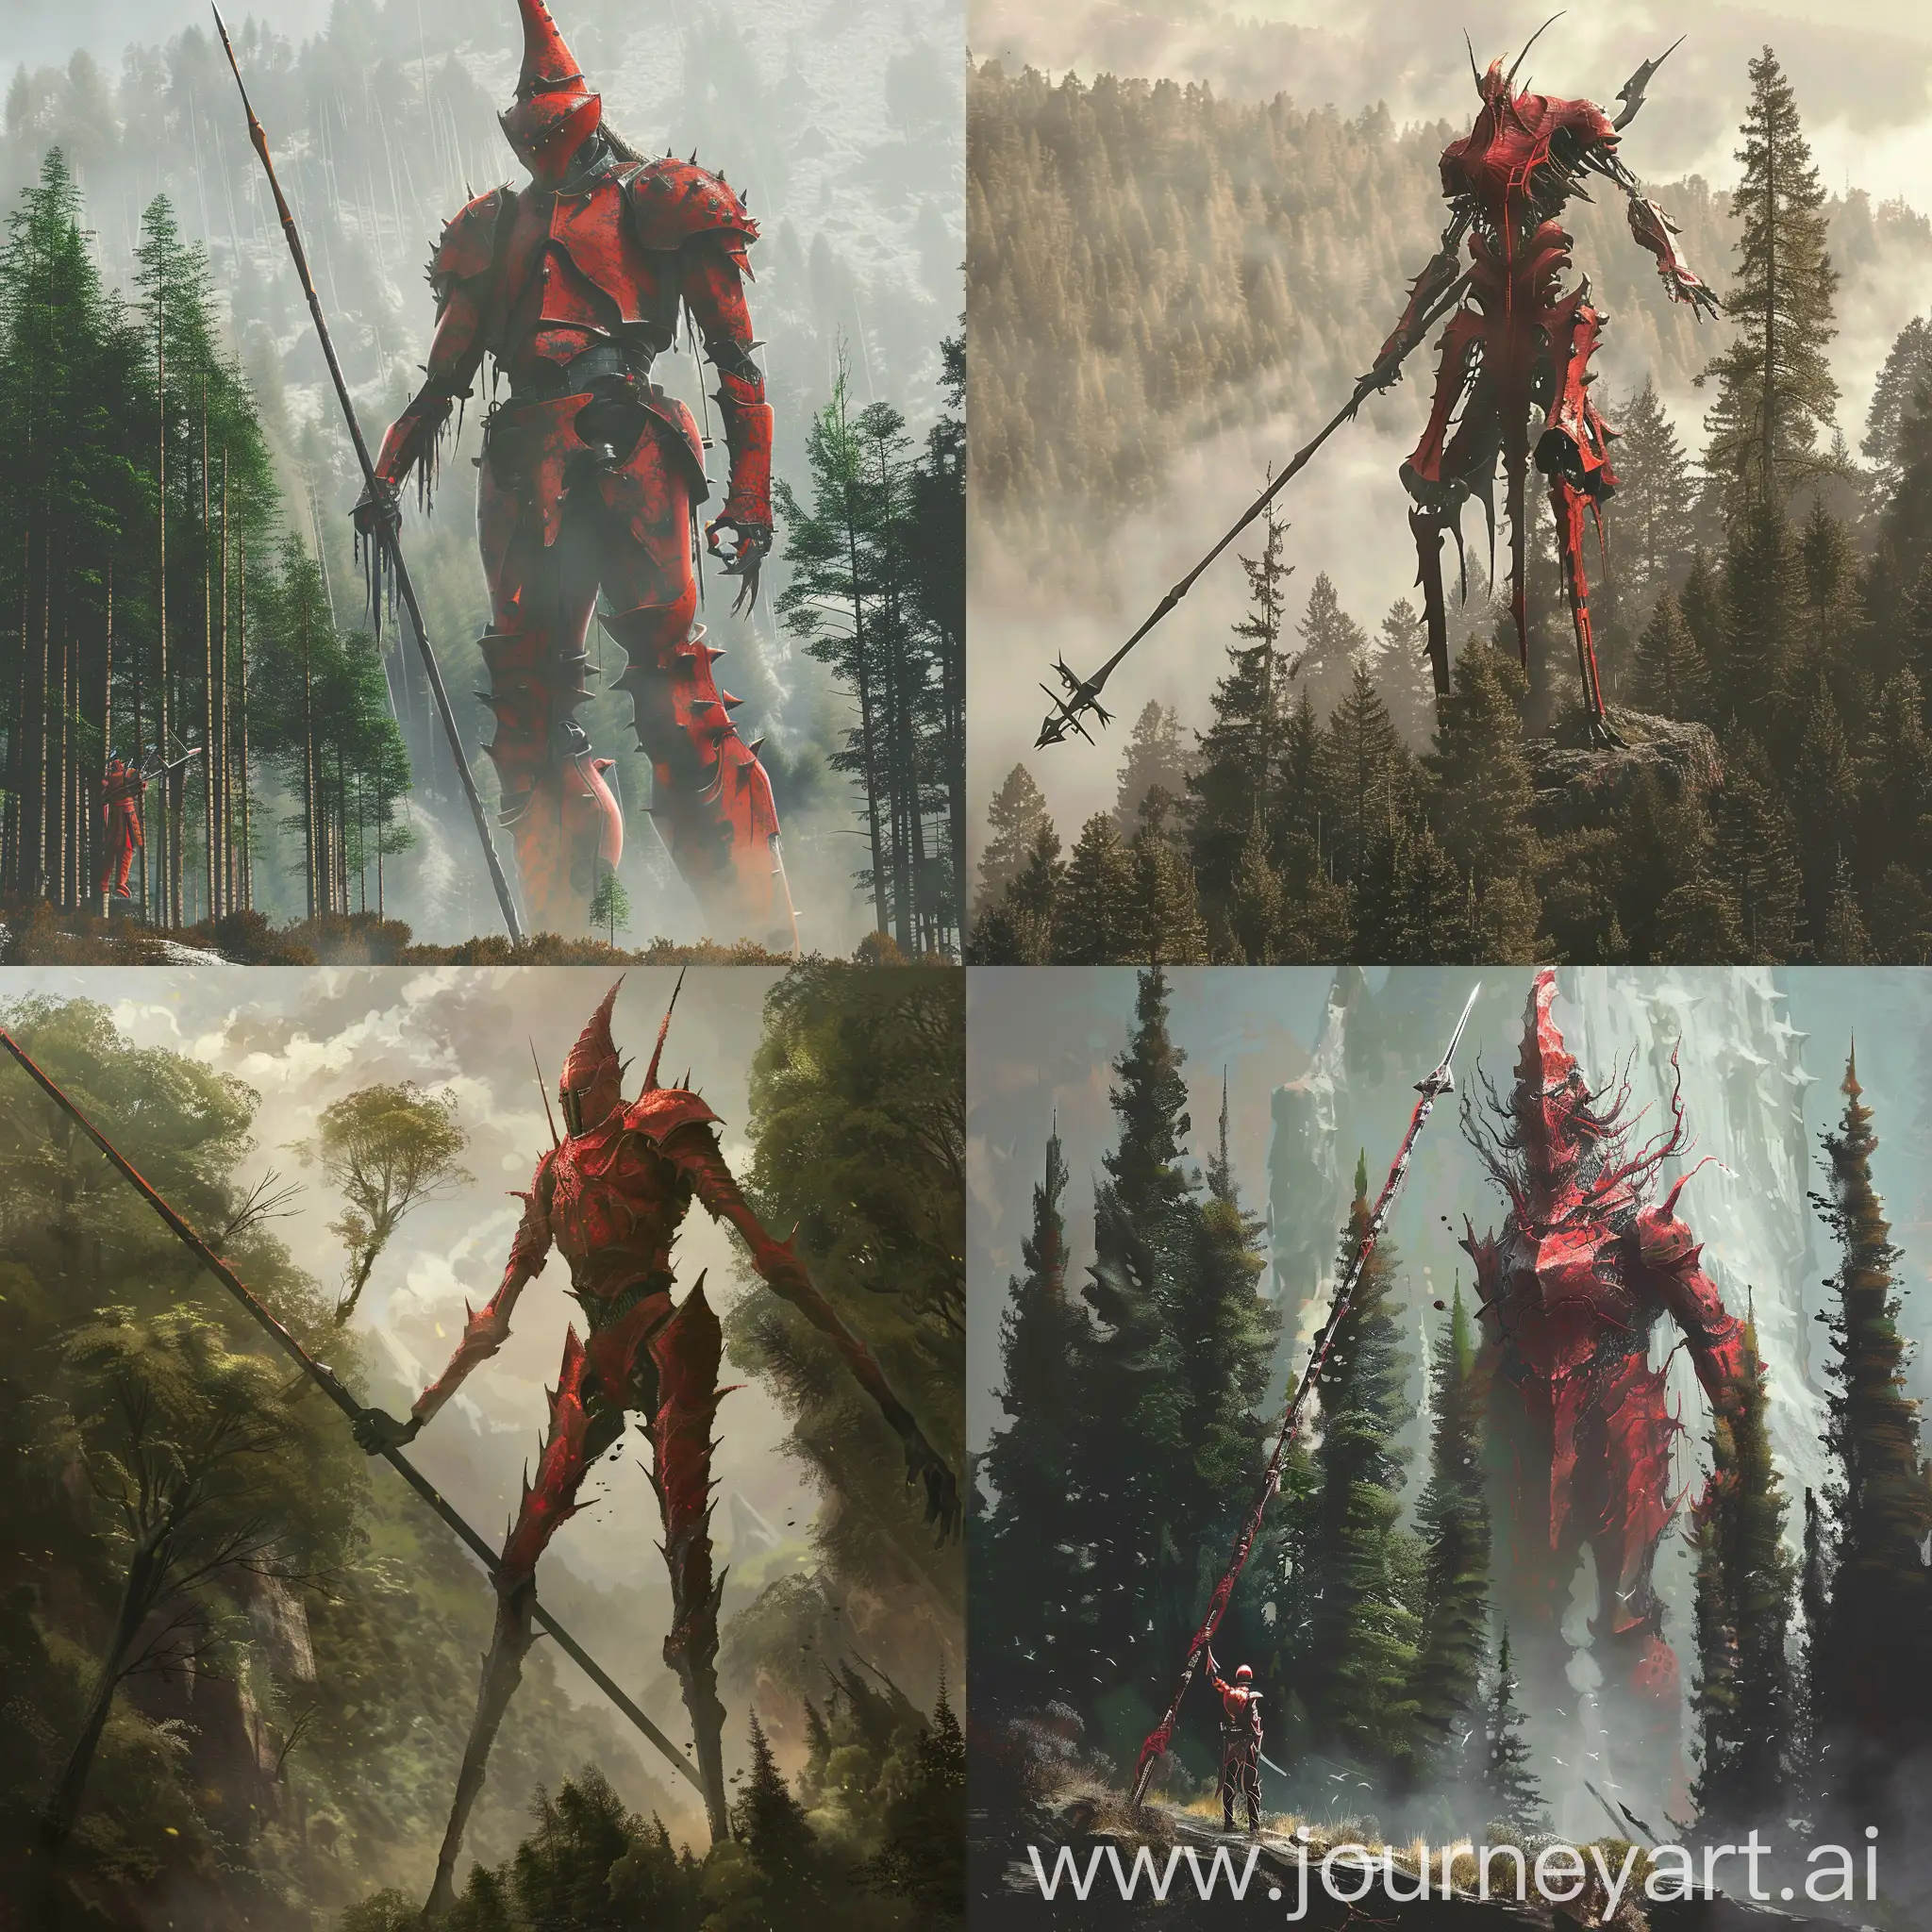 Majestic-Red-Armored-Knight-Enigmatic-Fantasy-Creature-in-Towering-Forest